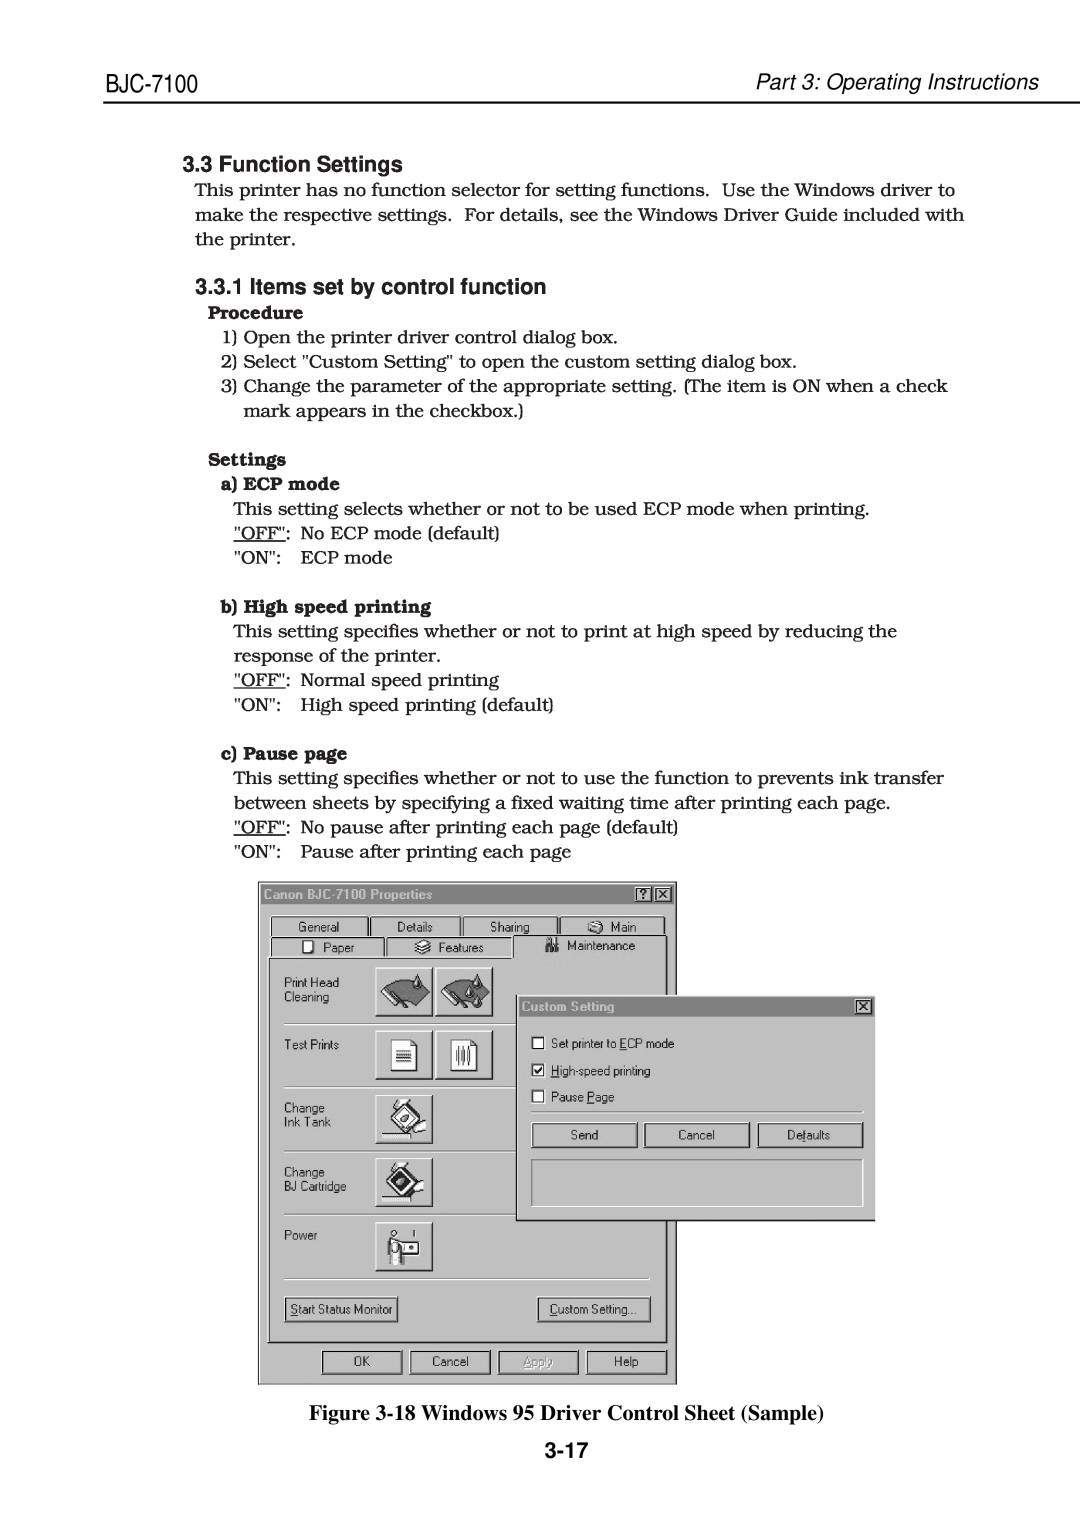 Canon QY8-1360-000 manual Function Settings, Items set by control function, 18 Windows 95 Driver Control Sheet Sample, 3-17 